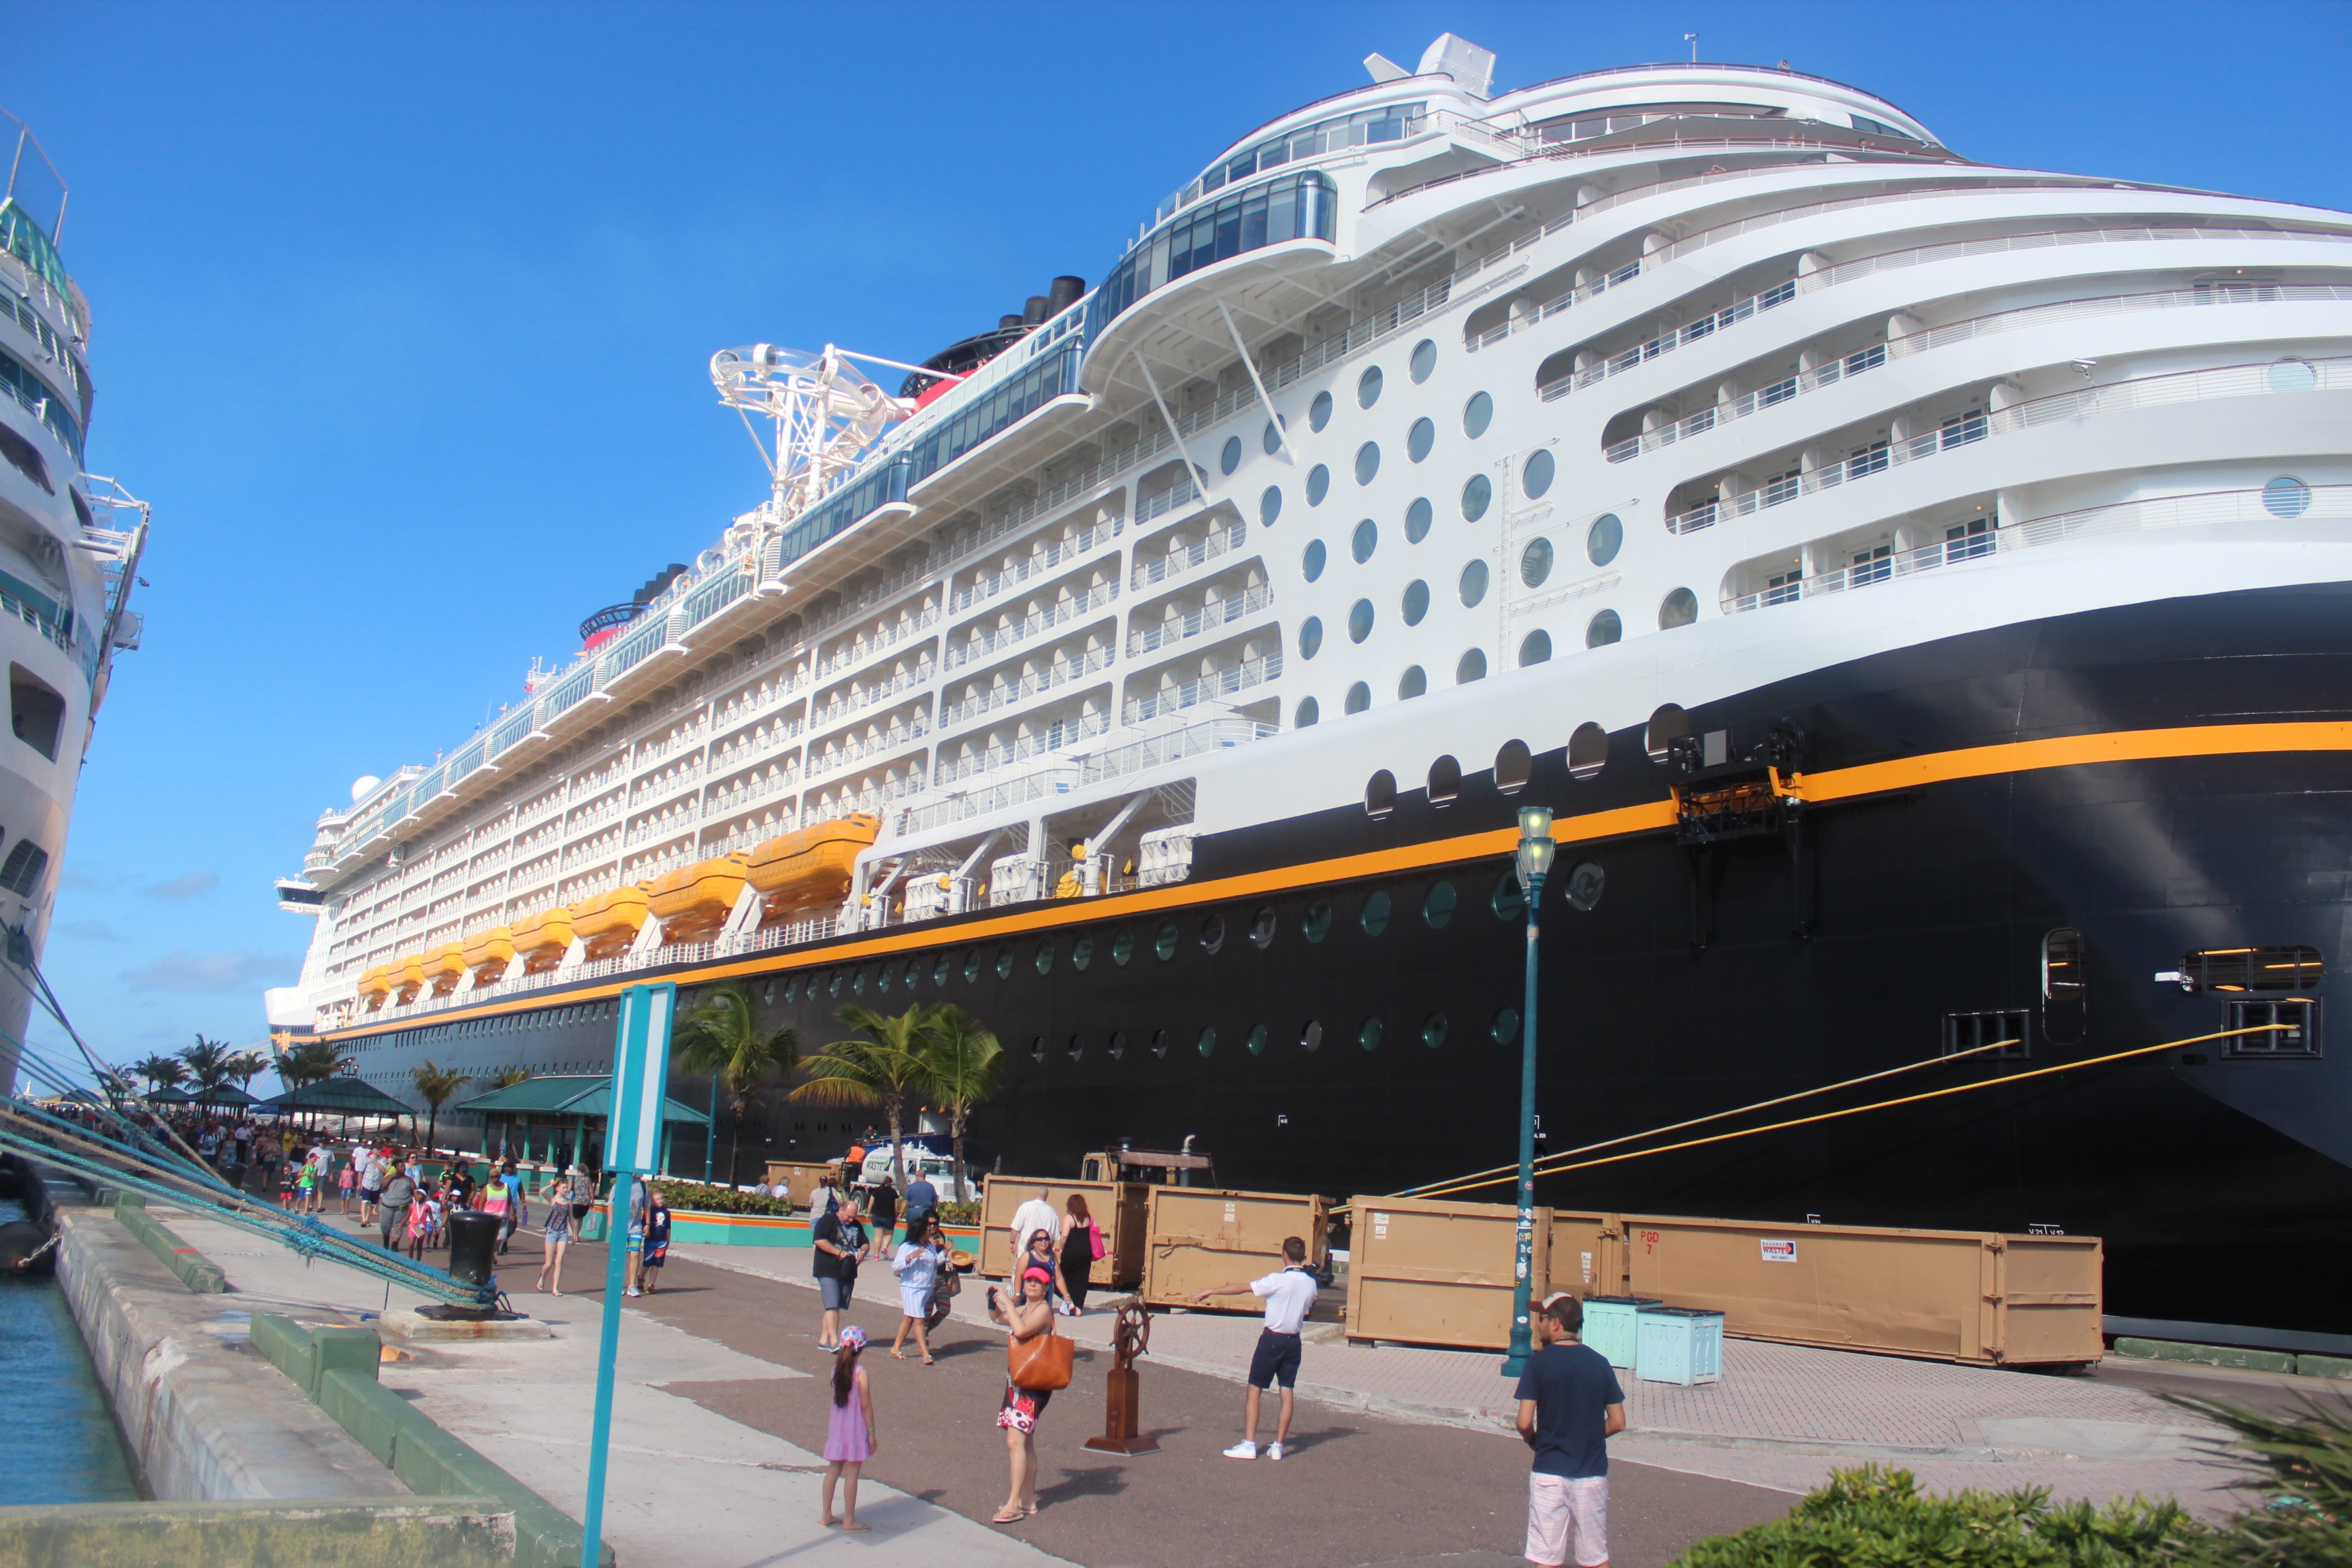 Our Very MerryTime Cruise on the Disney Dream 2015: Travelogue Day 2